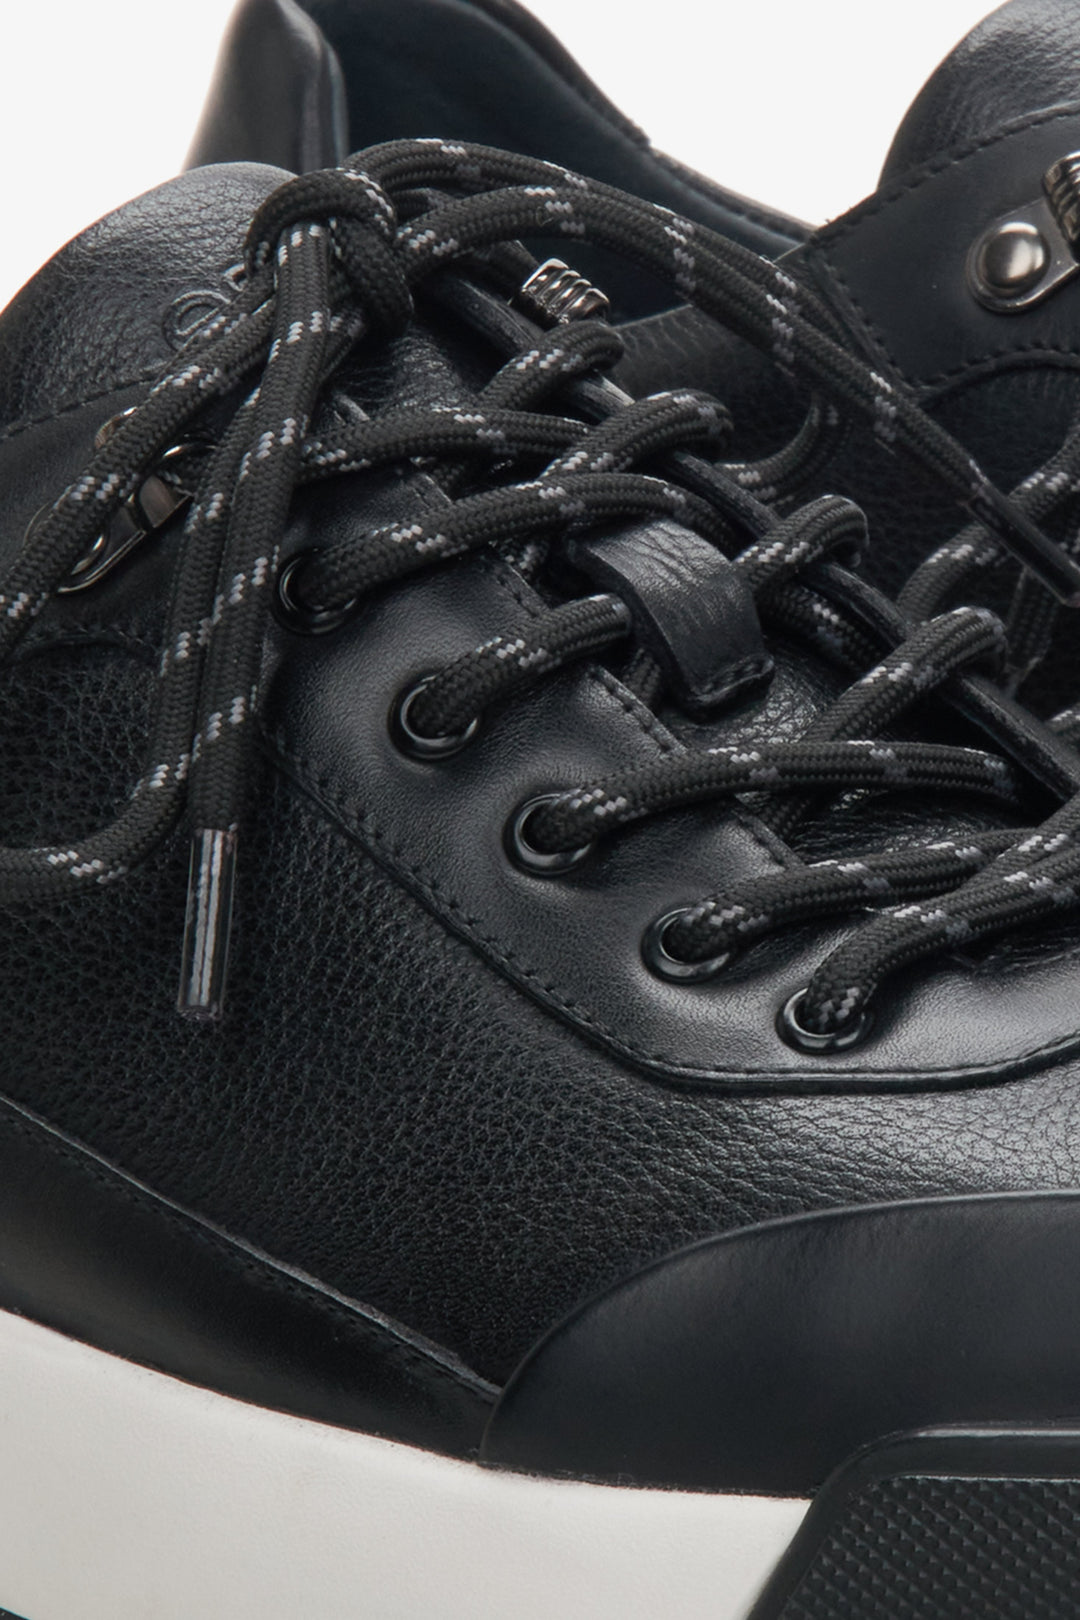 Men's black leather sneakers by Estro - close-up on the details.